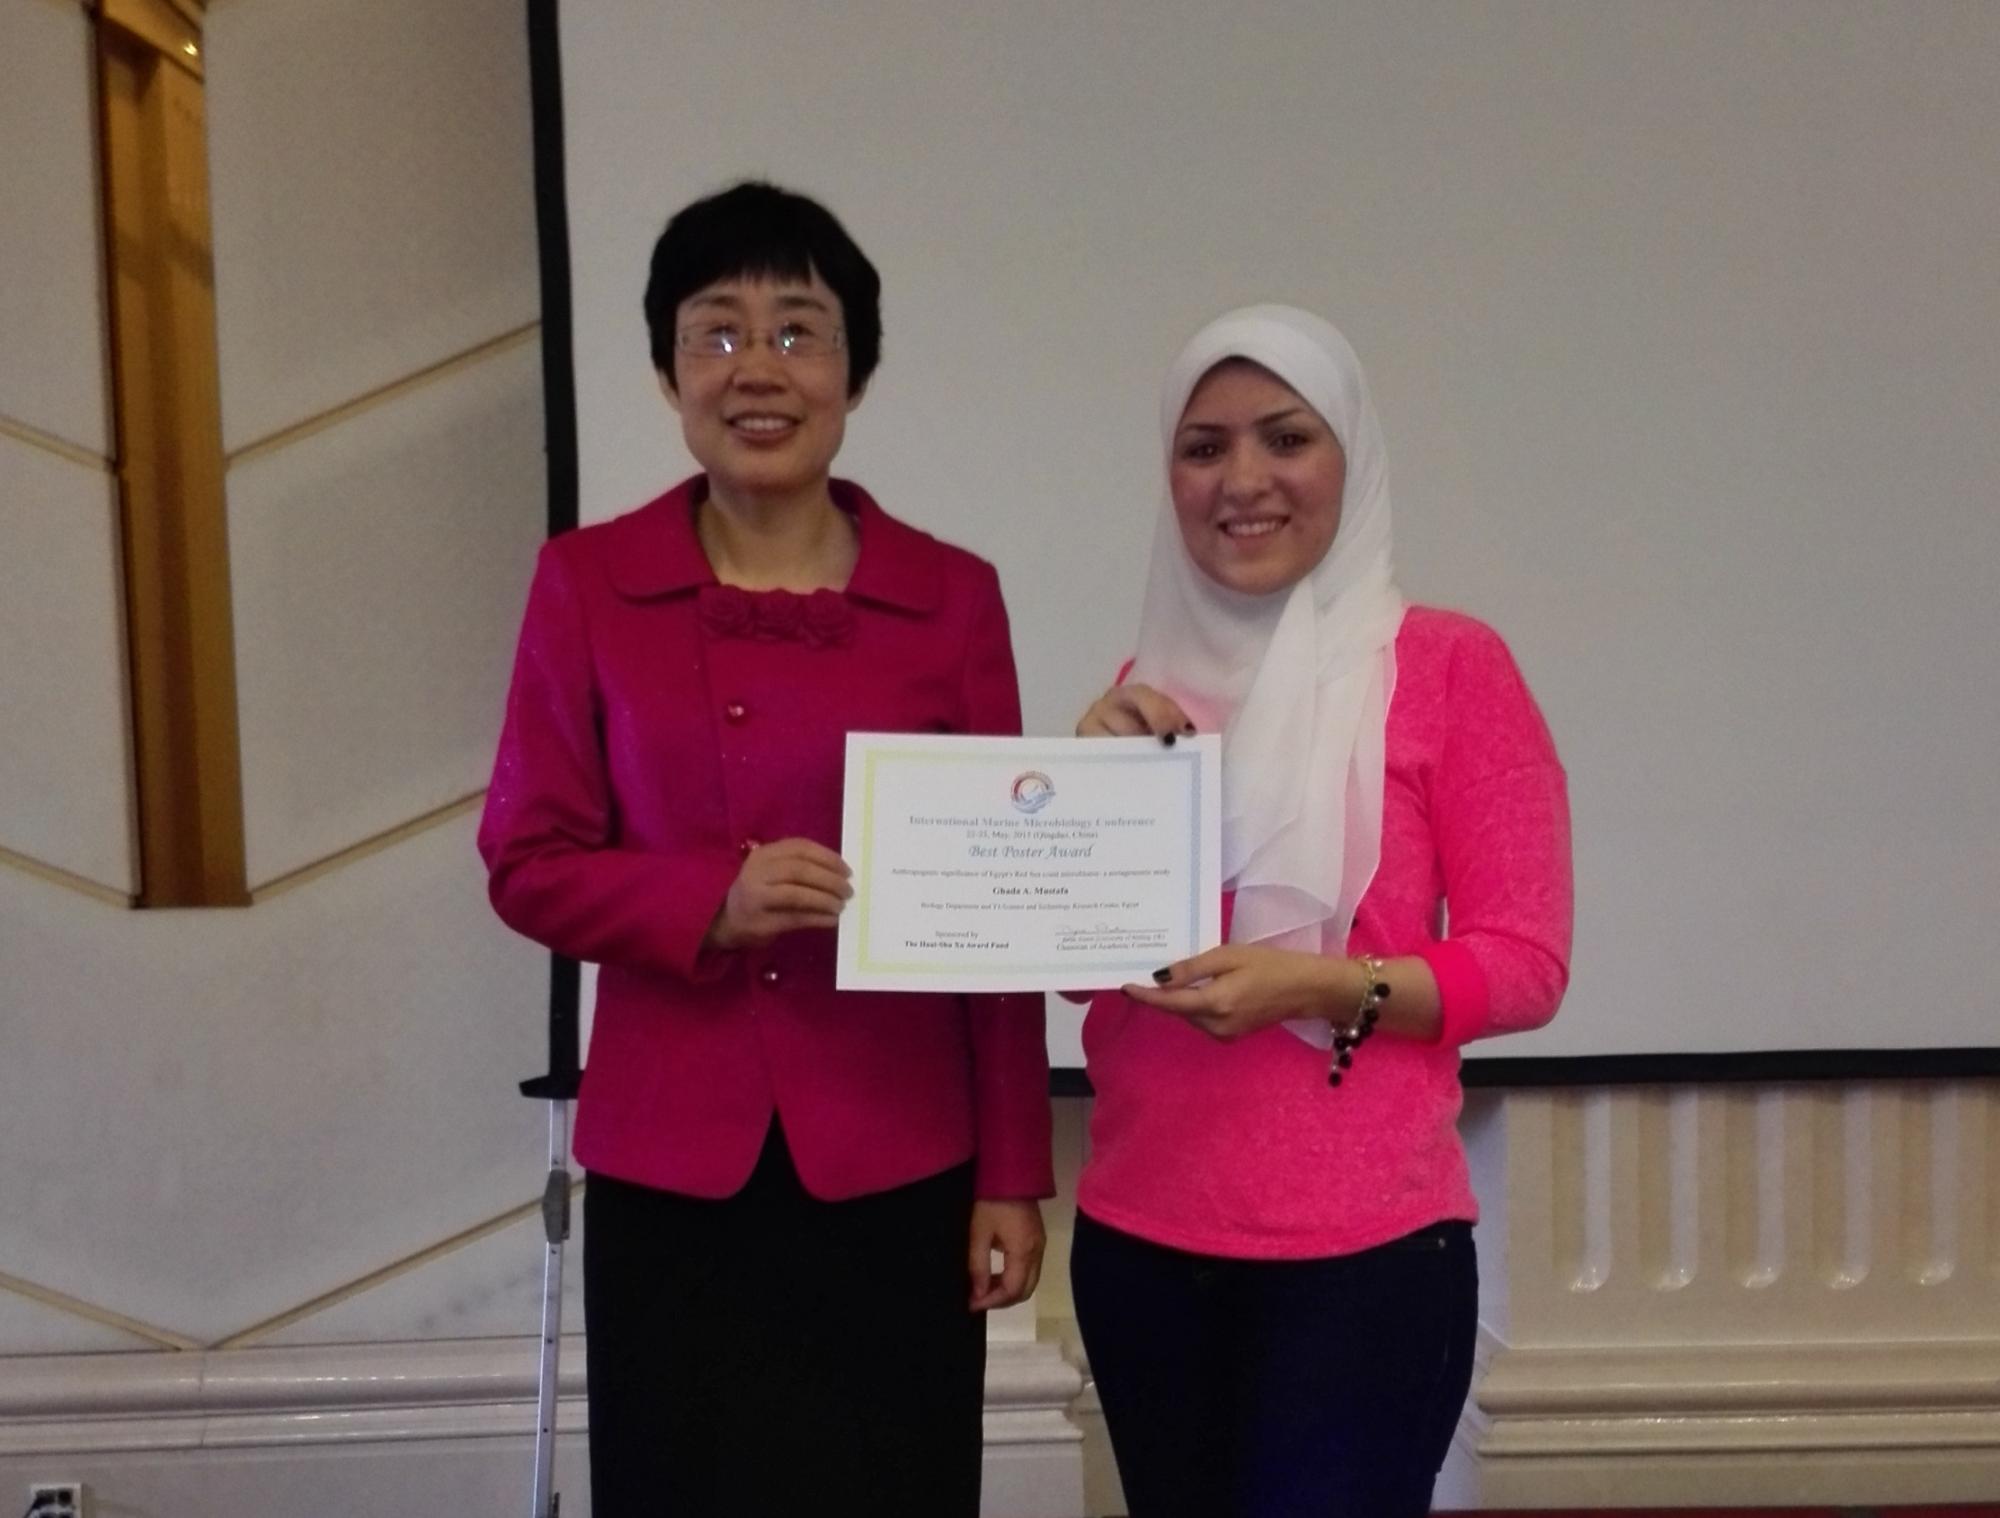 Ghada Mustafa recently received the Best Poster Award at the International Marine Microbiology Conference in Qingdao, China